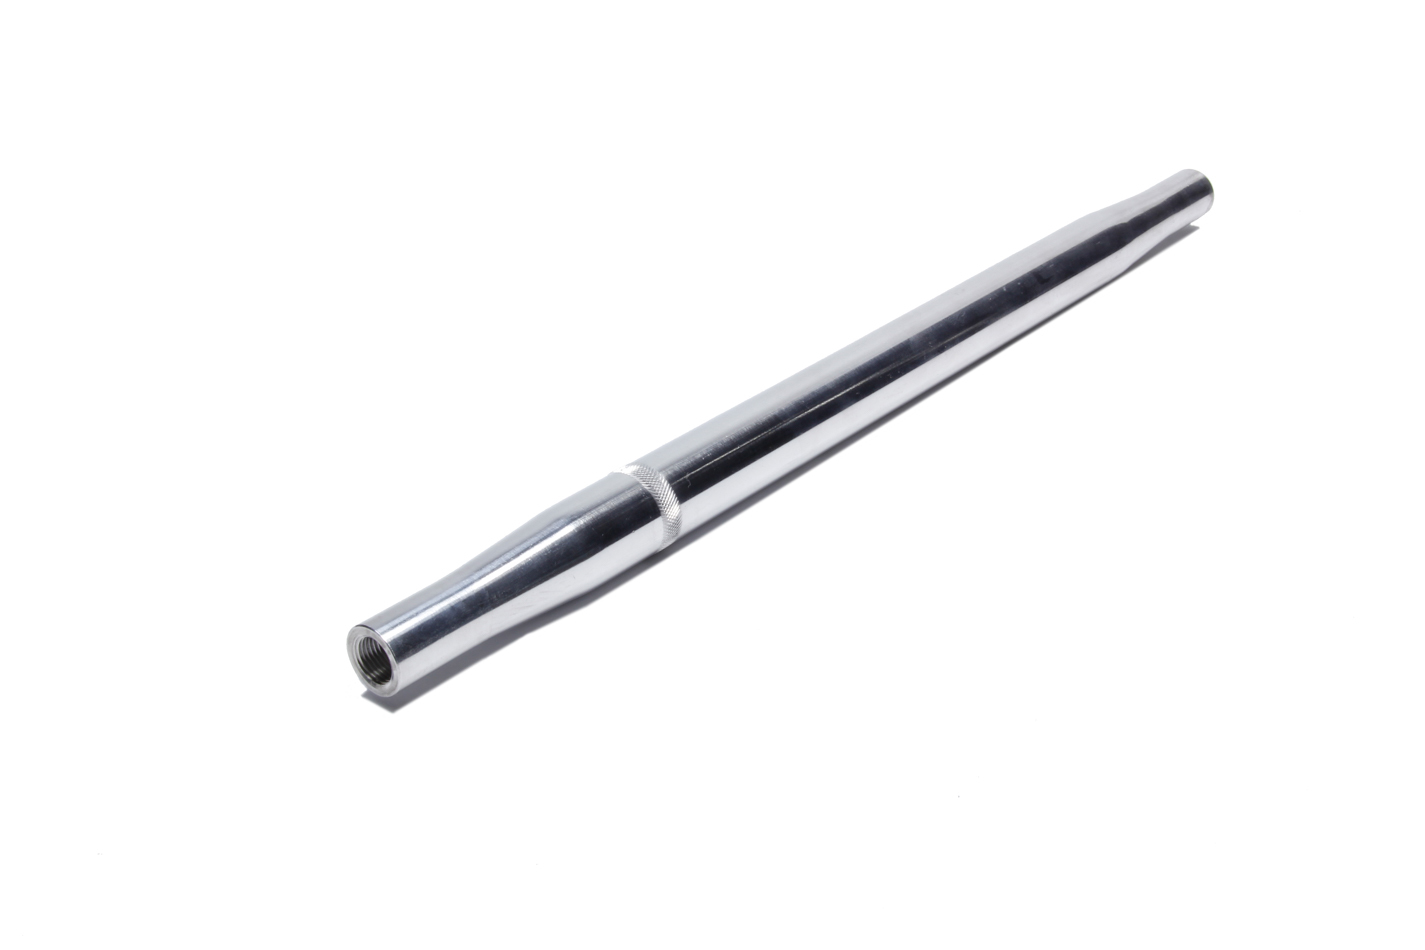 M AND W ALUMINUM PRODUCTS Swaged Rod 1.125in. x 26.5in. 5/8in. Thread P/N - SR-26.5L-POL